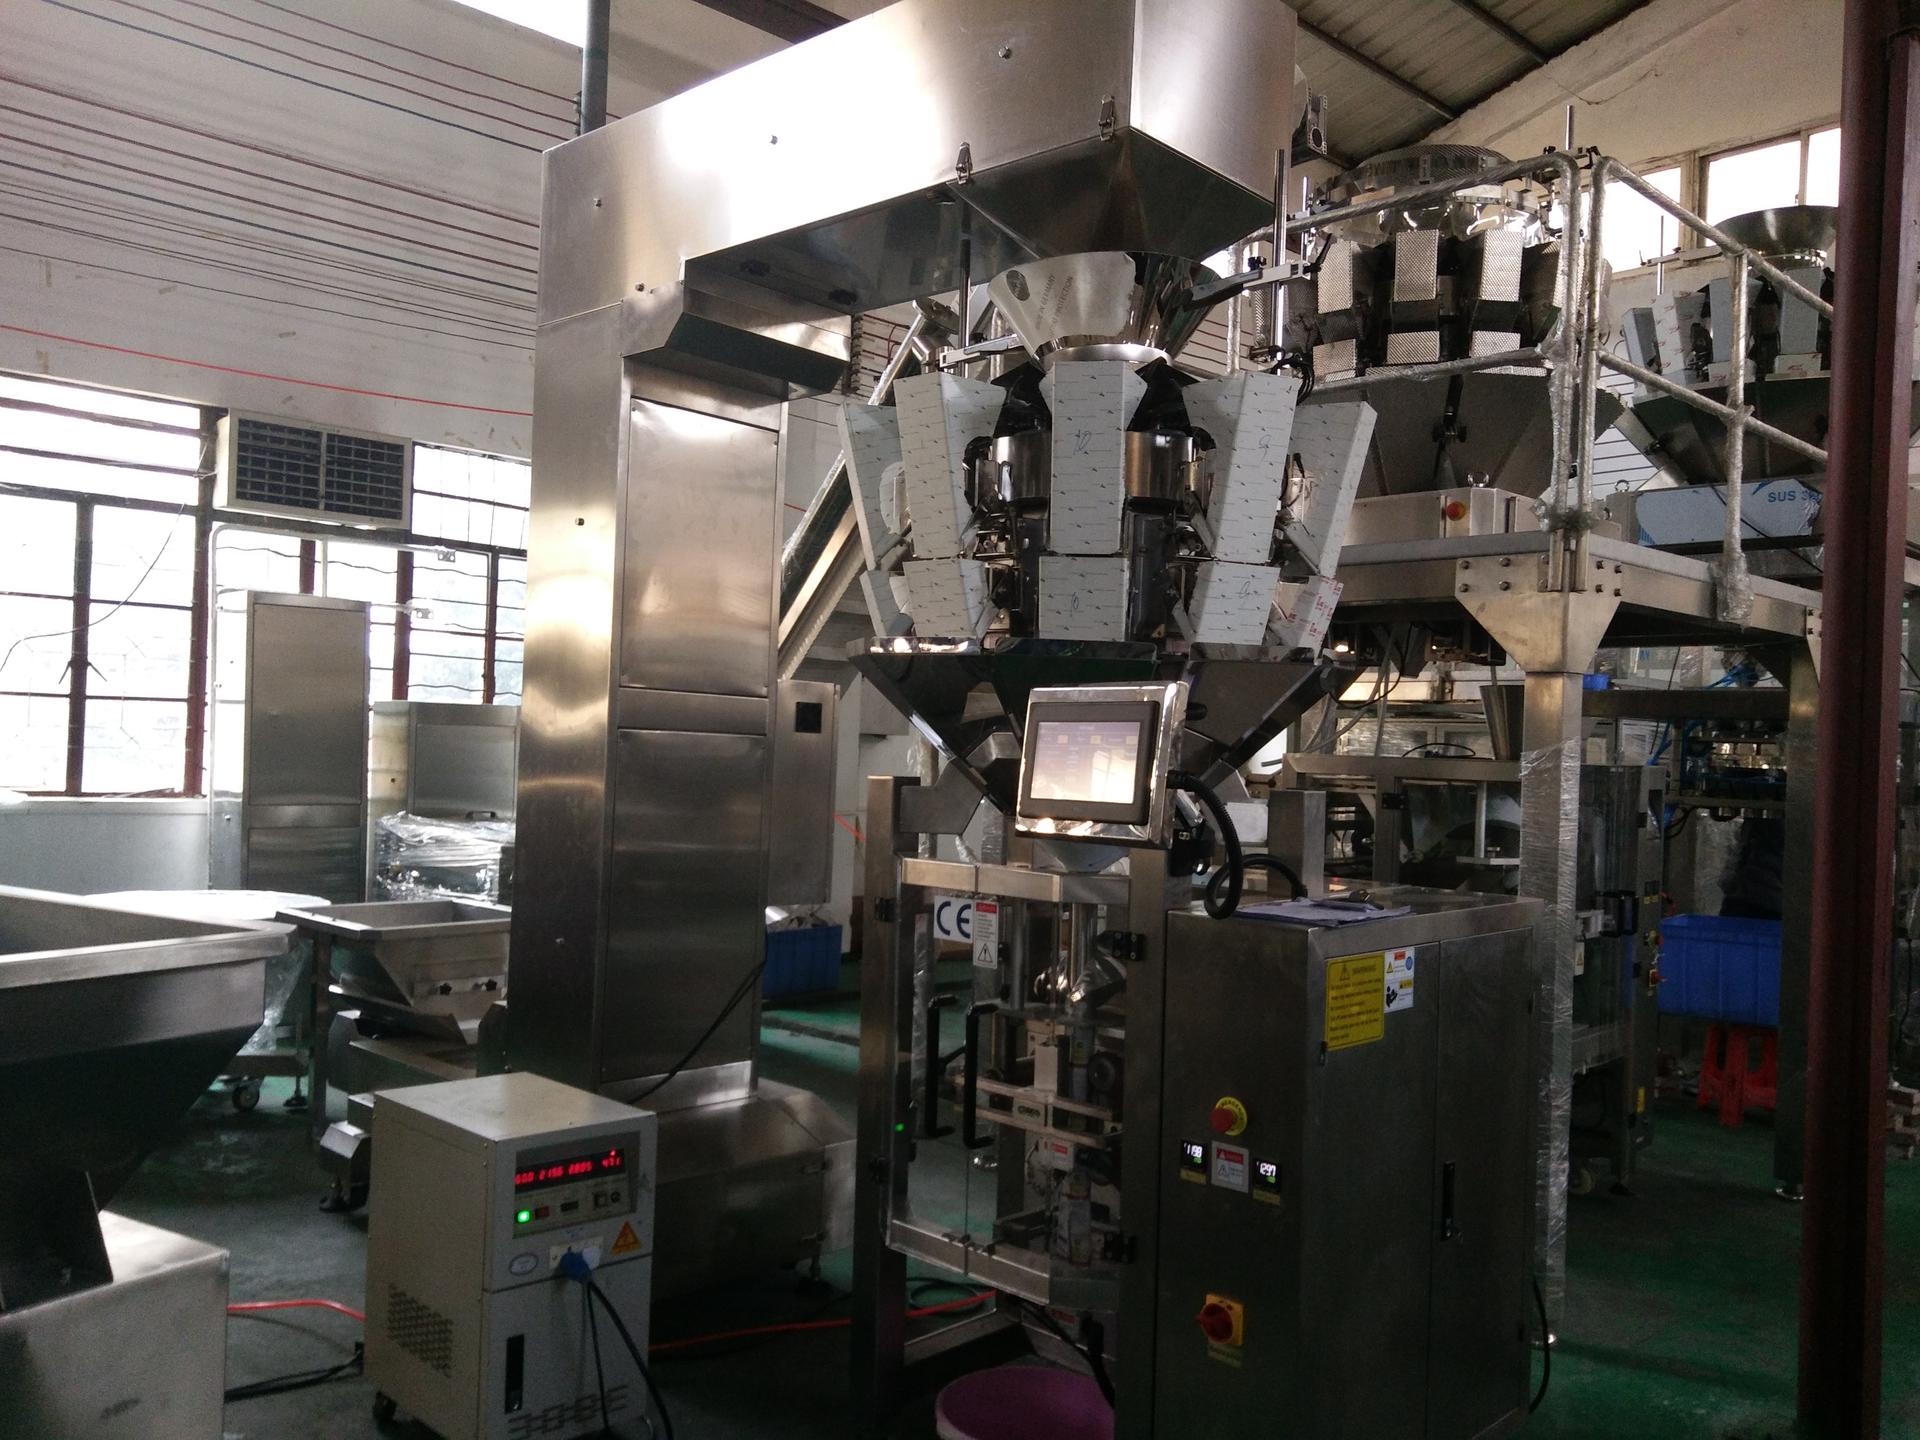 SW-M10P420 Automatic Combine Weighing and Packing Machine for Snack Food/Nuts/Dried Fruit/ Small Granule